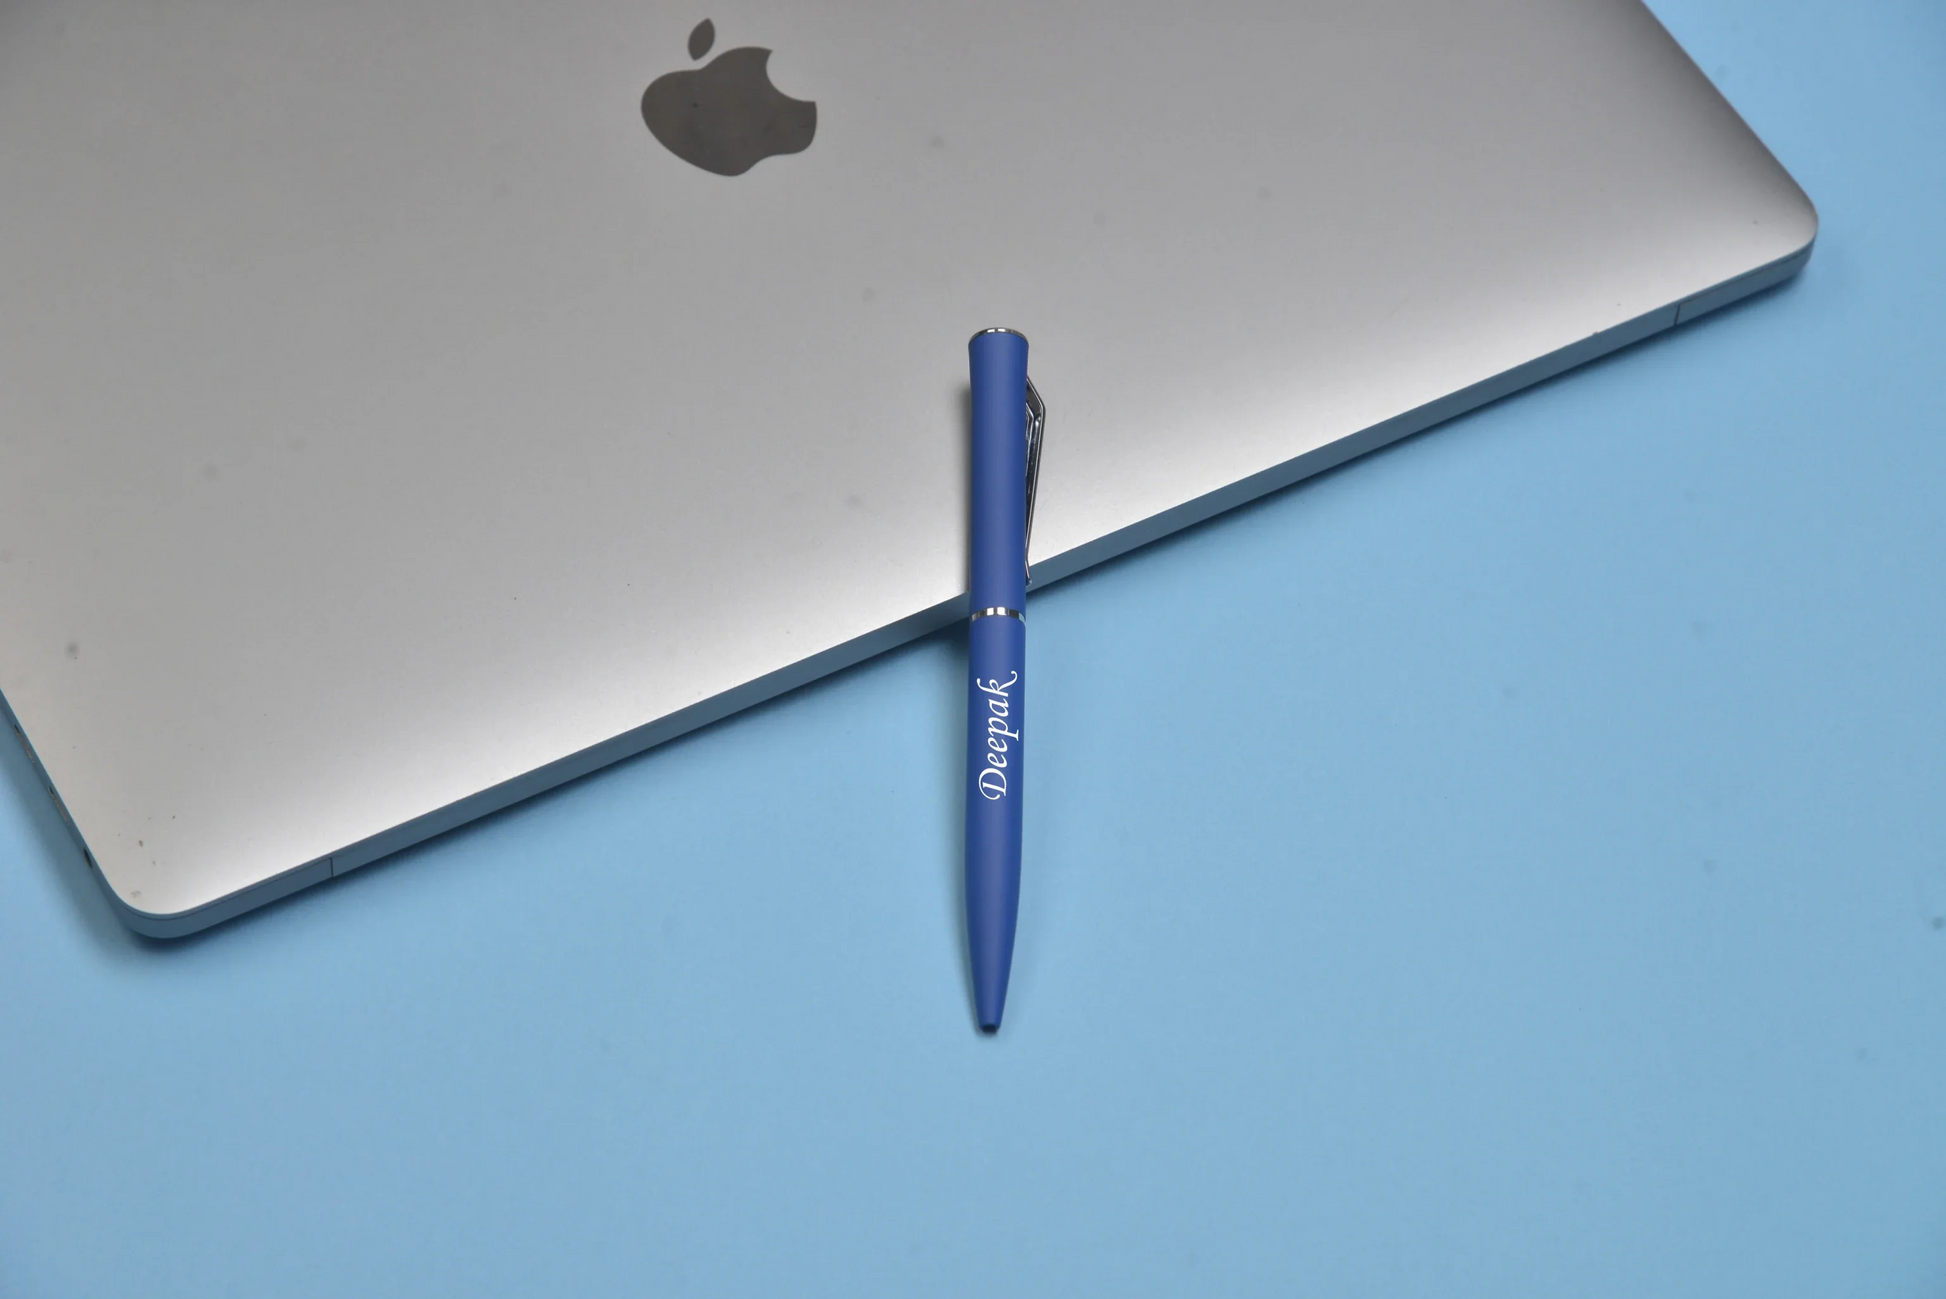 Don't miss out the personalized pen which makes the best corporate gift.